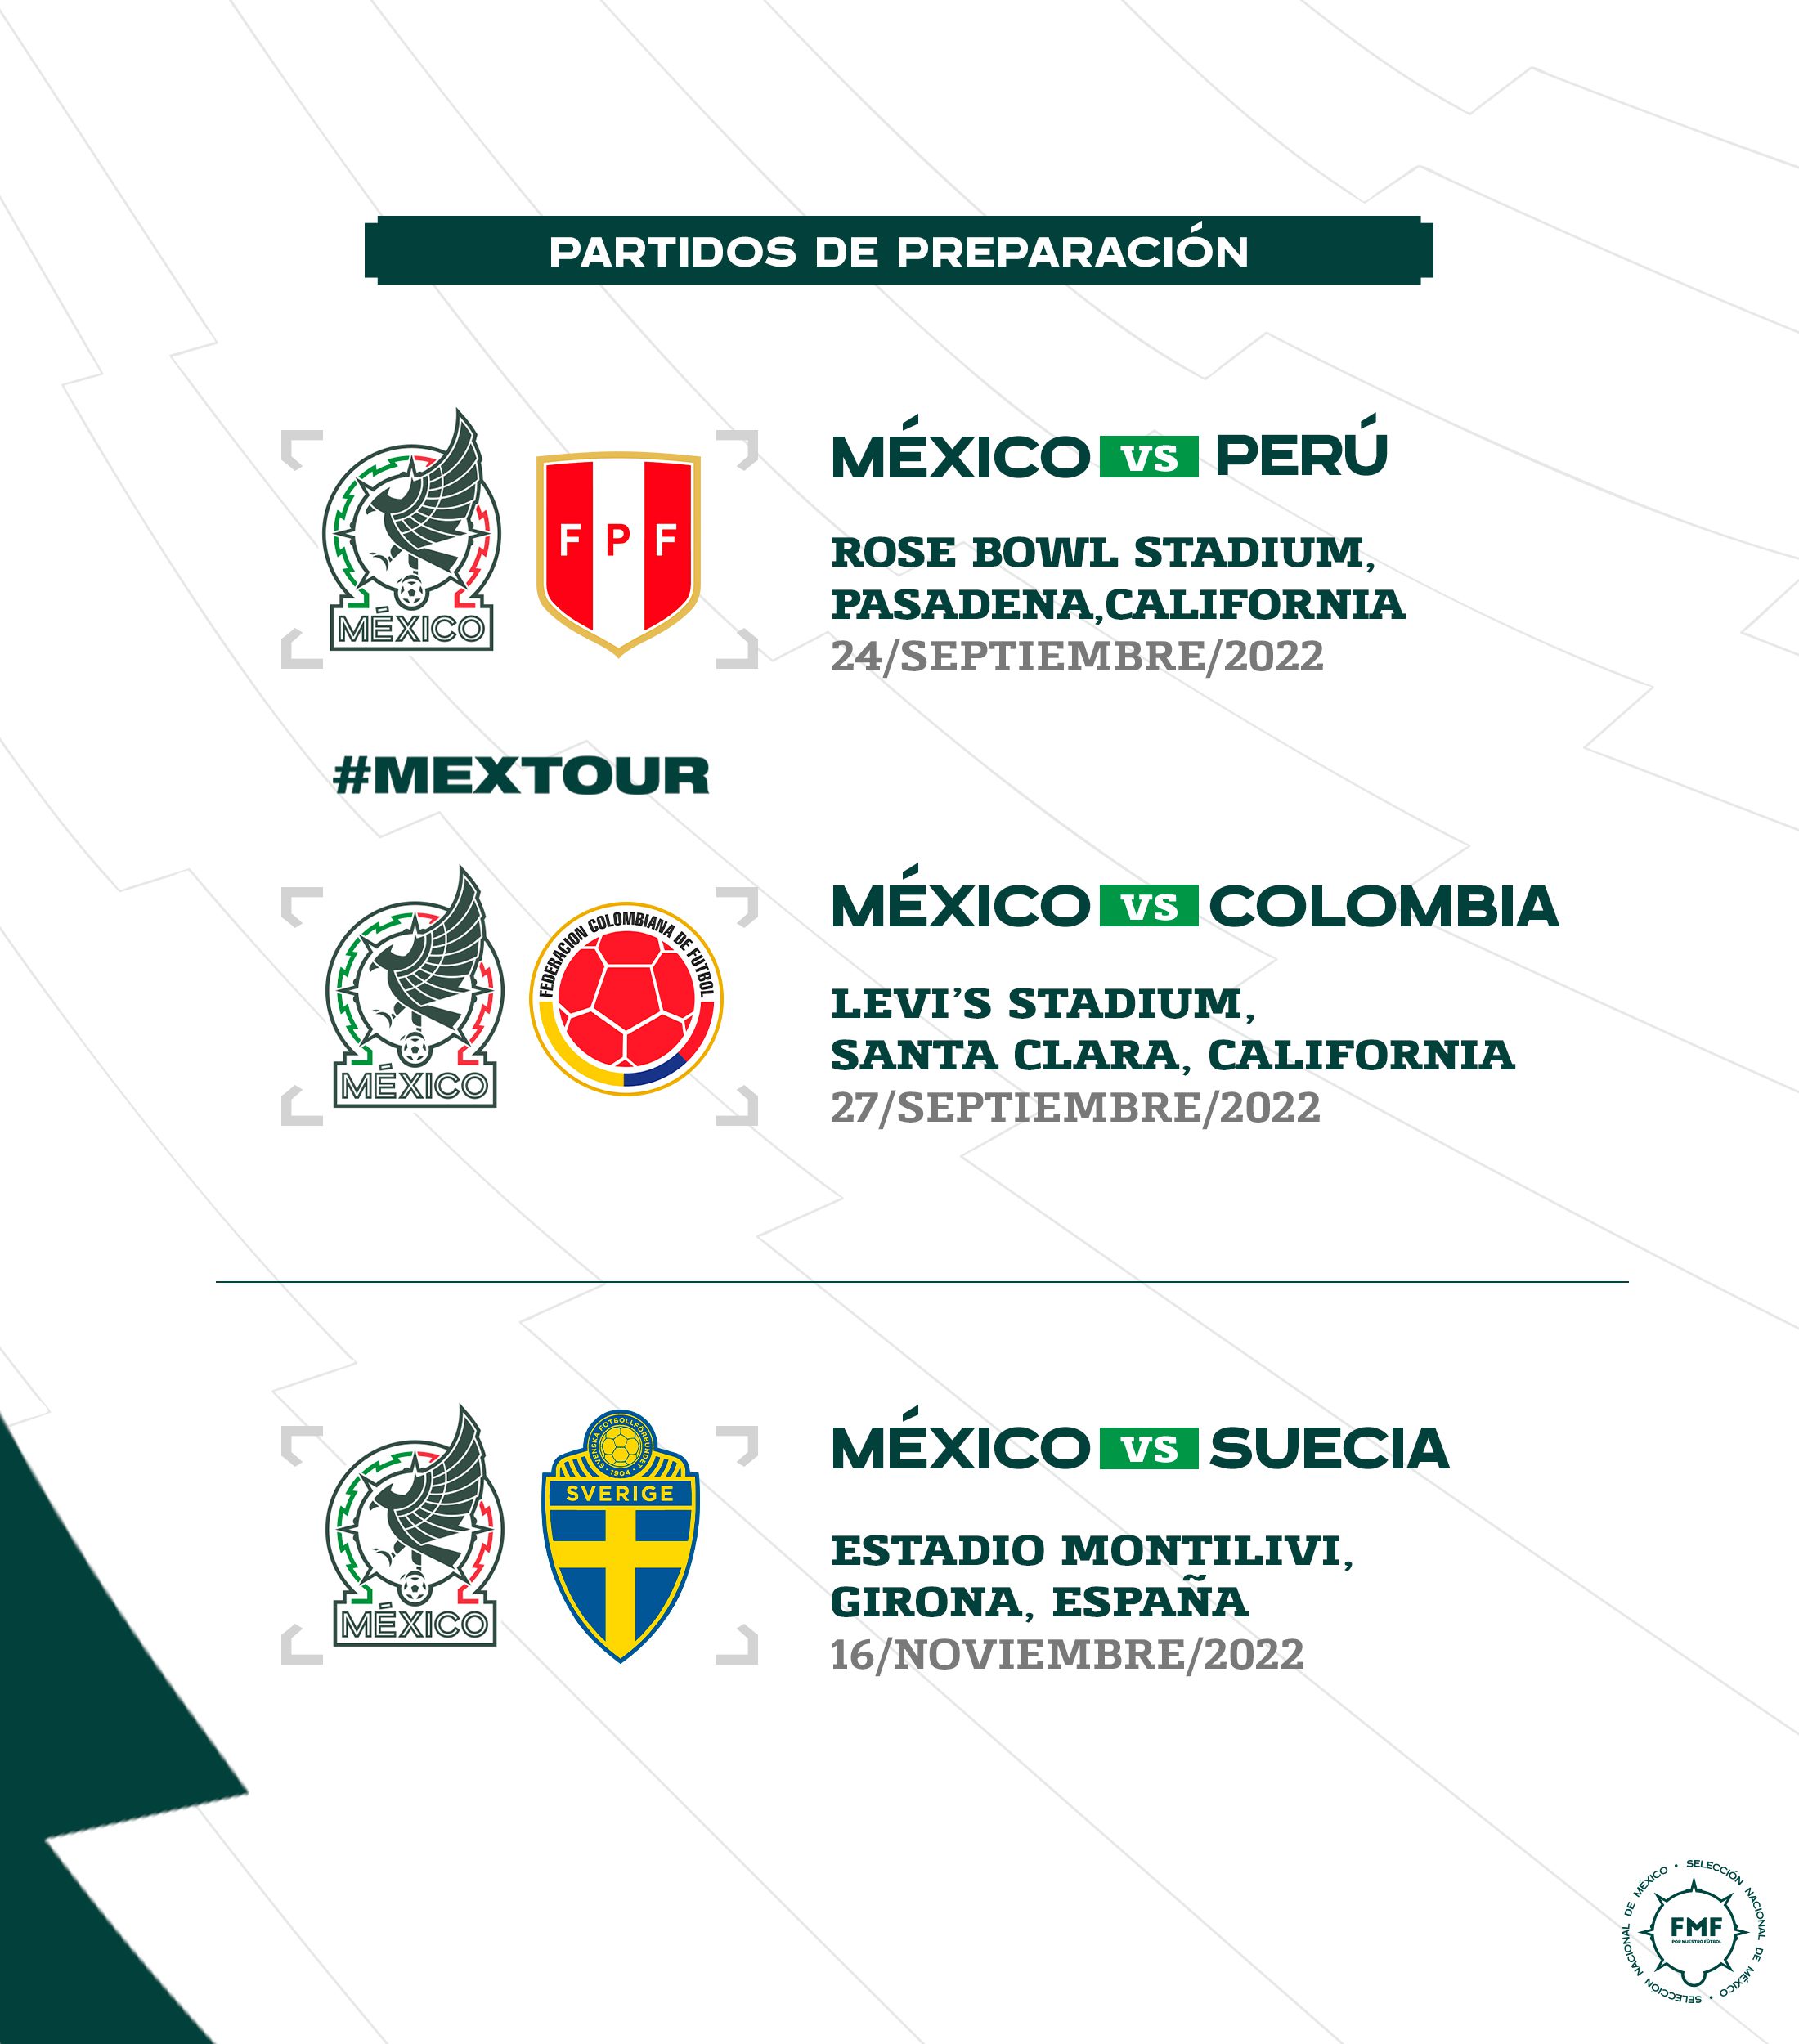 The Mexican national team, friendly matches before Qatar 2022. Photo: miseleccionmx